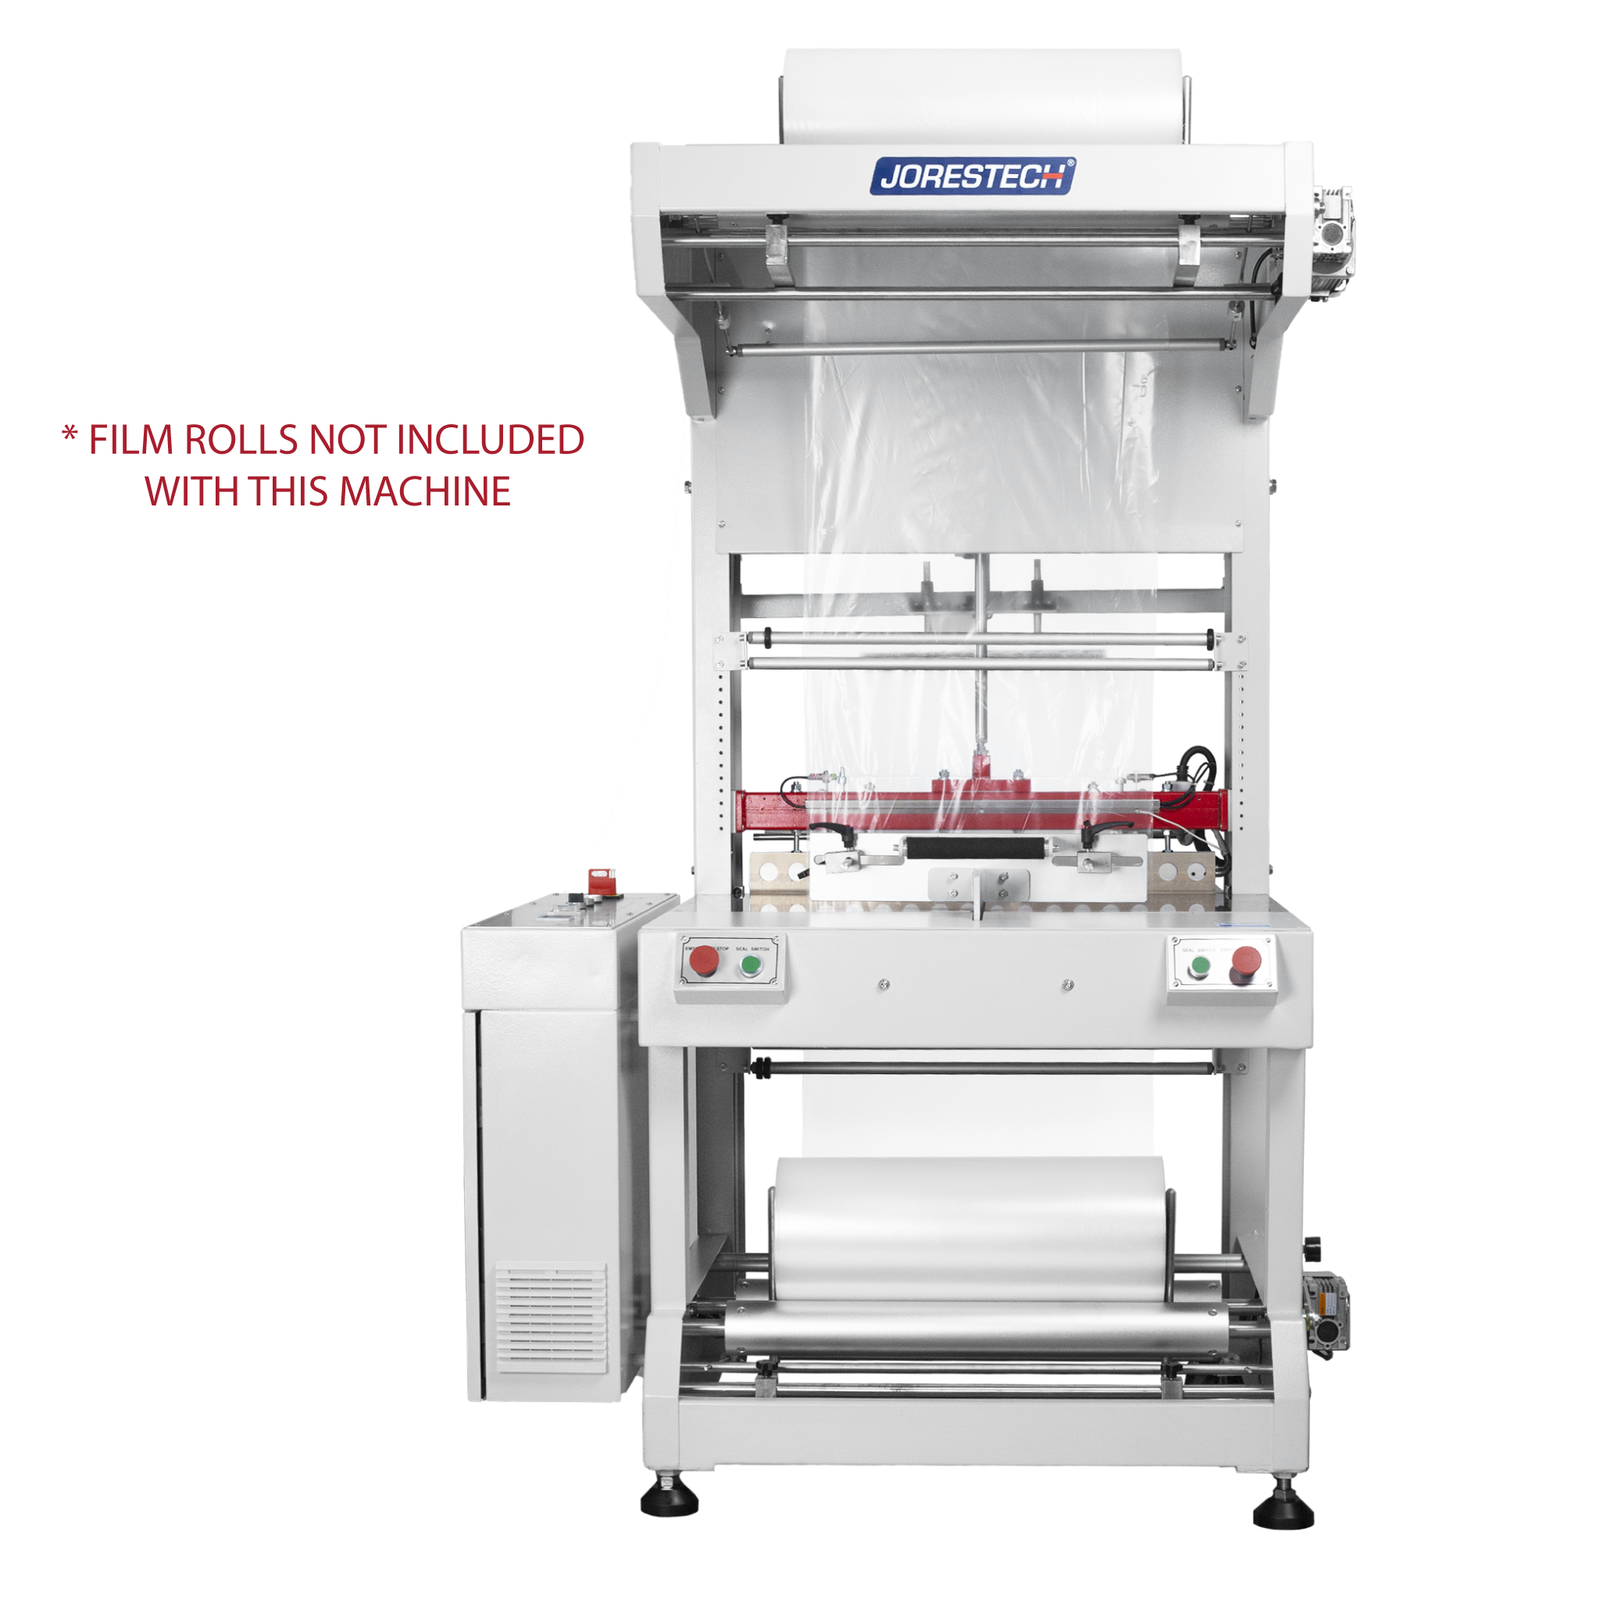 JORES TECHNOLOGIES® semi automatic sleeve film sealer. There is a red text that reads “film rolls not included with this machine”